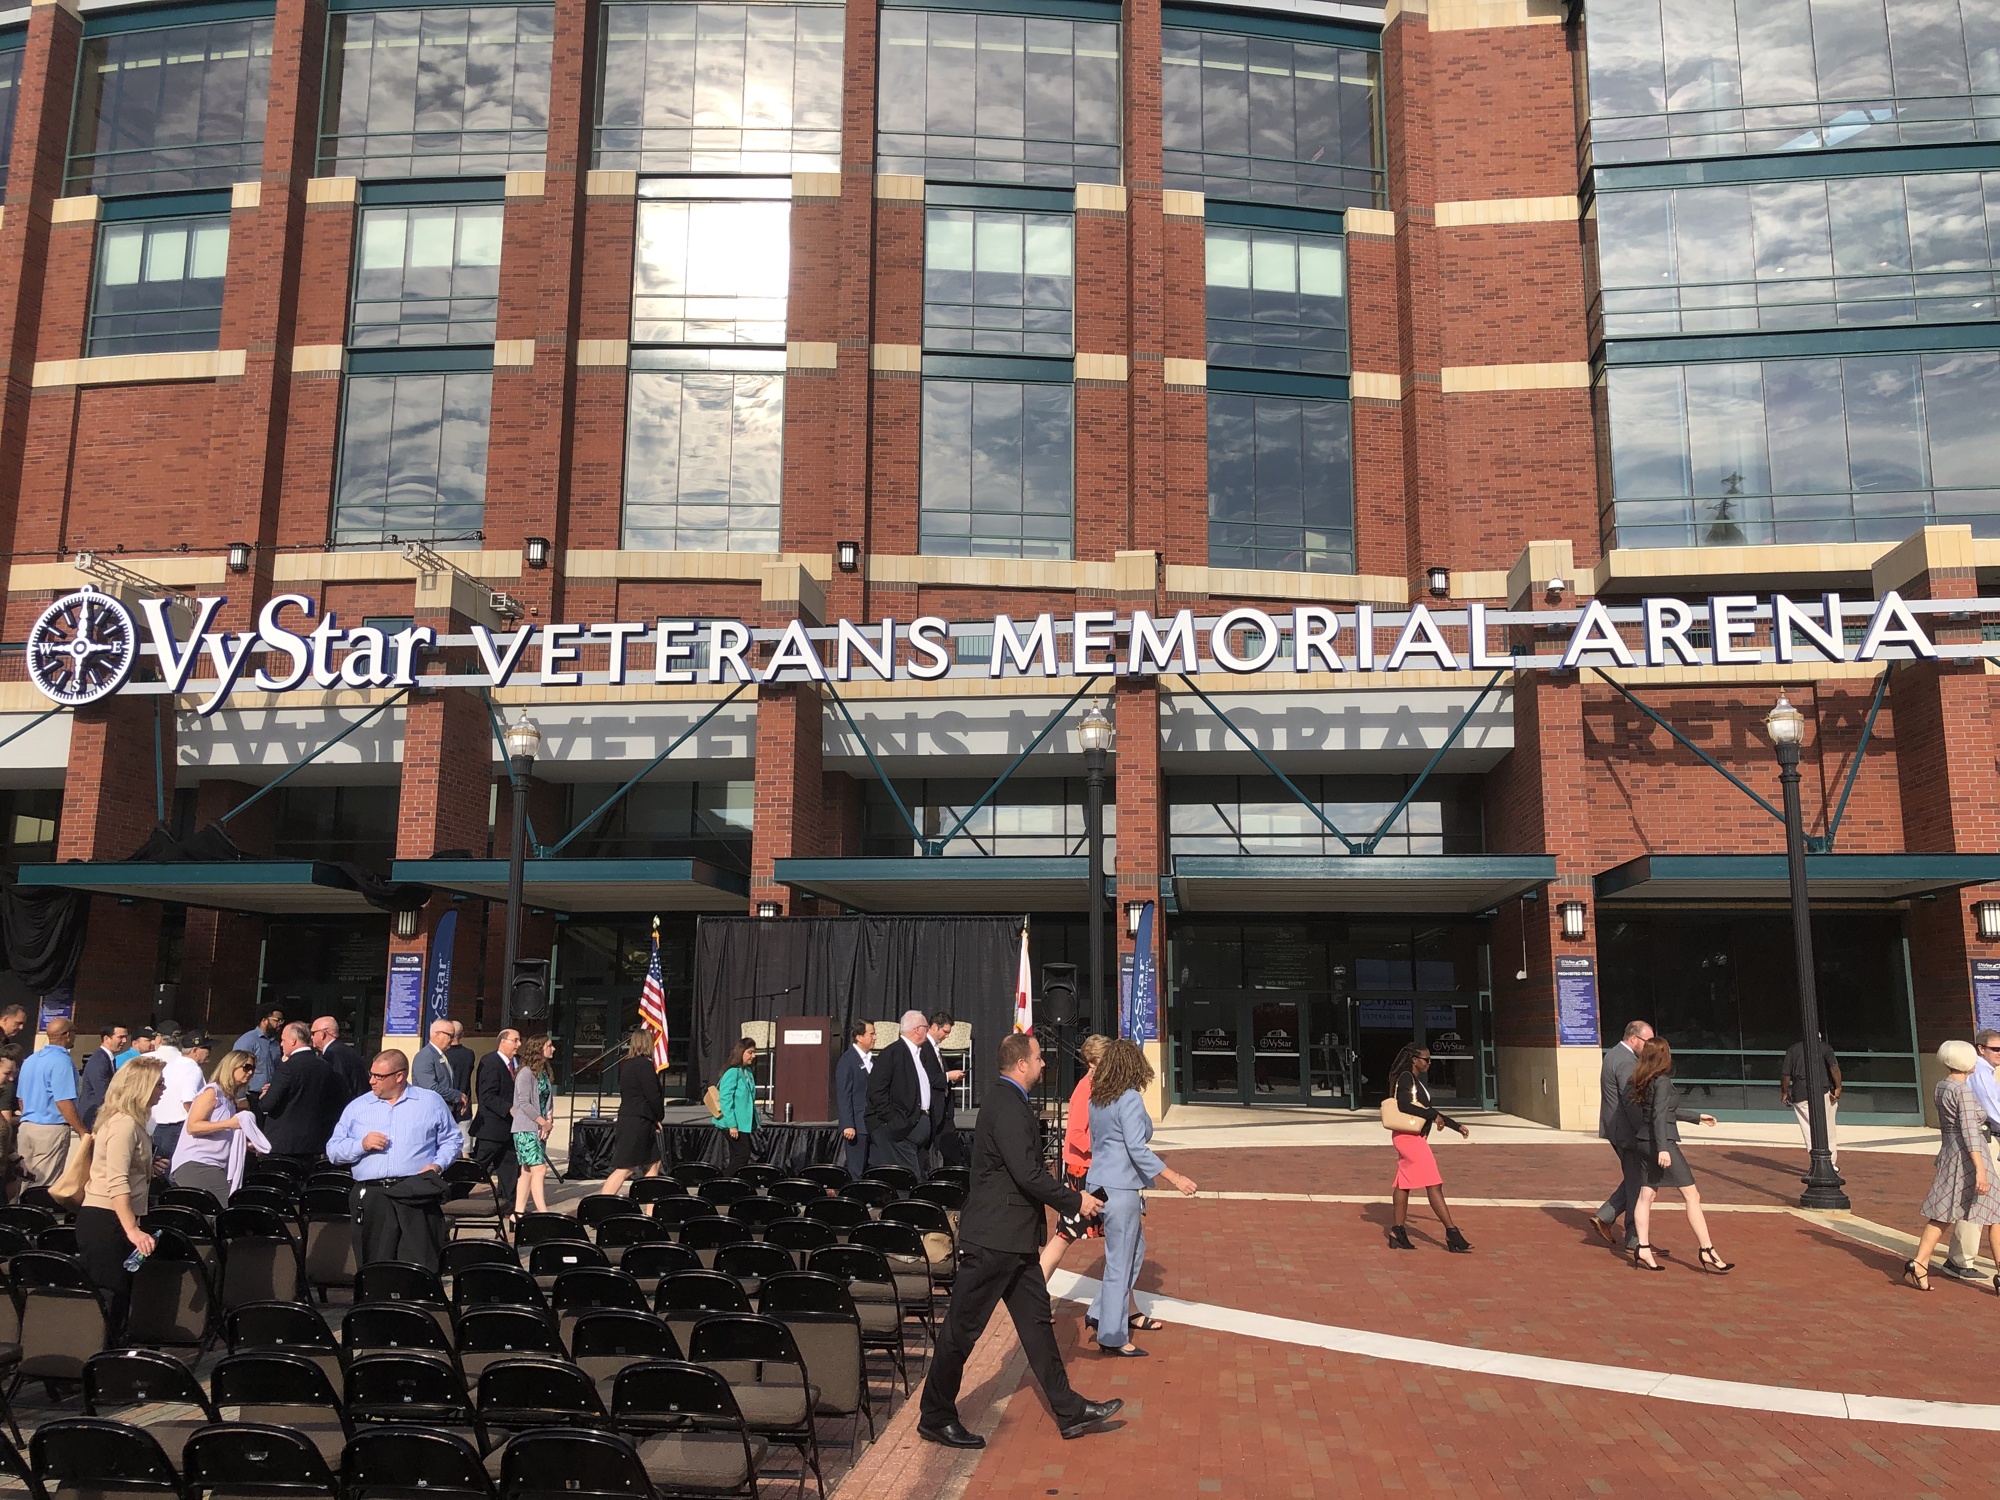 Naming Rights Deal With VyStar Proposed For Jacksonville Veterans Memorial  Arena